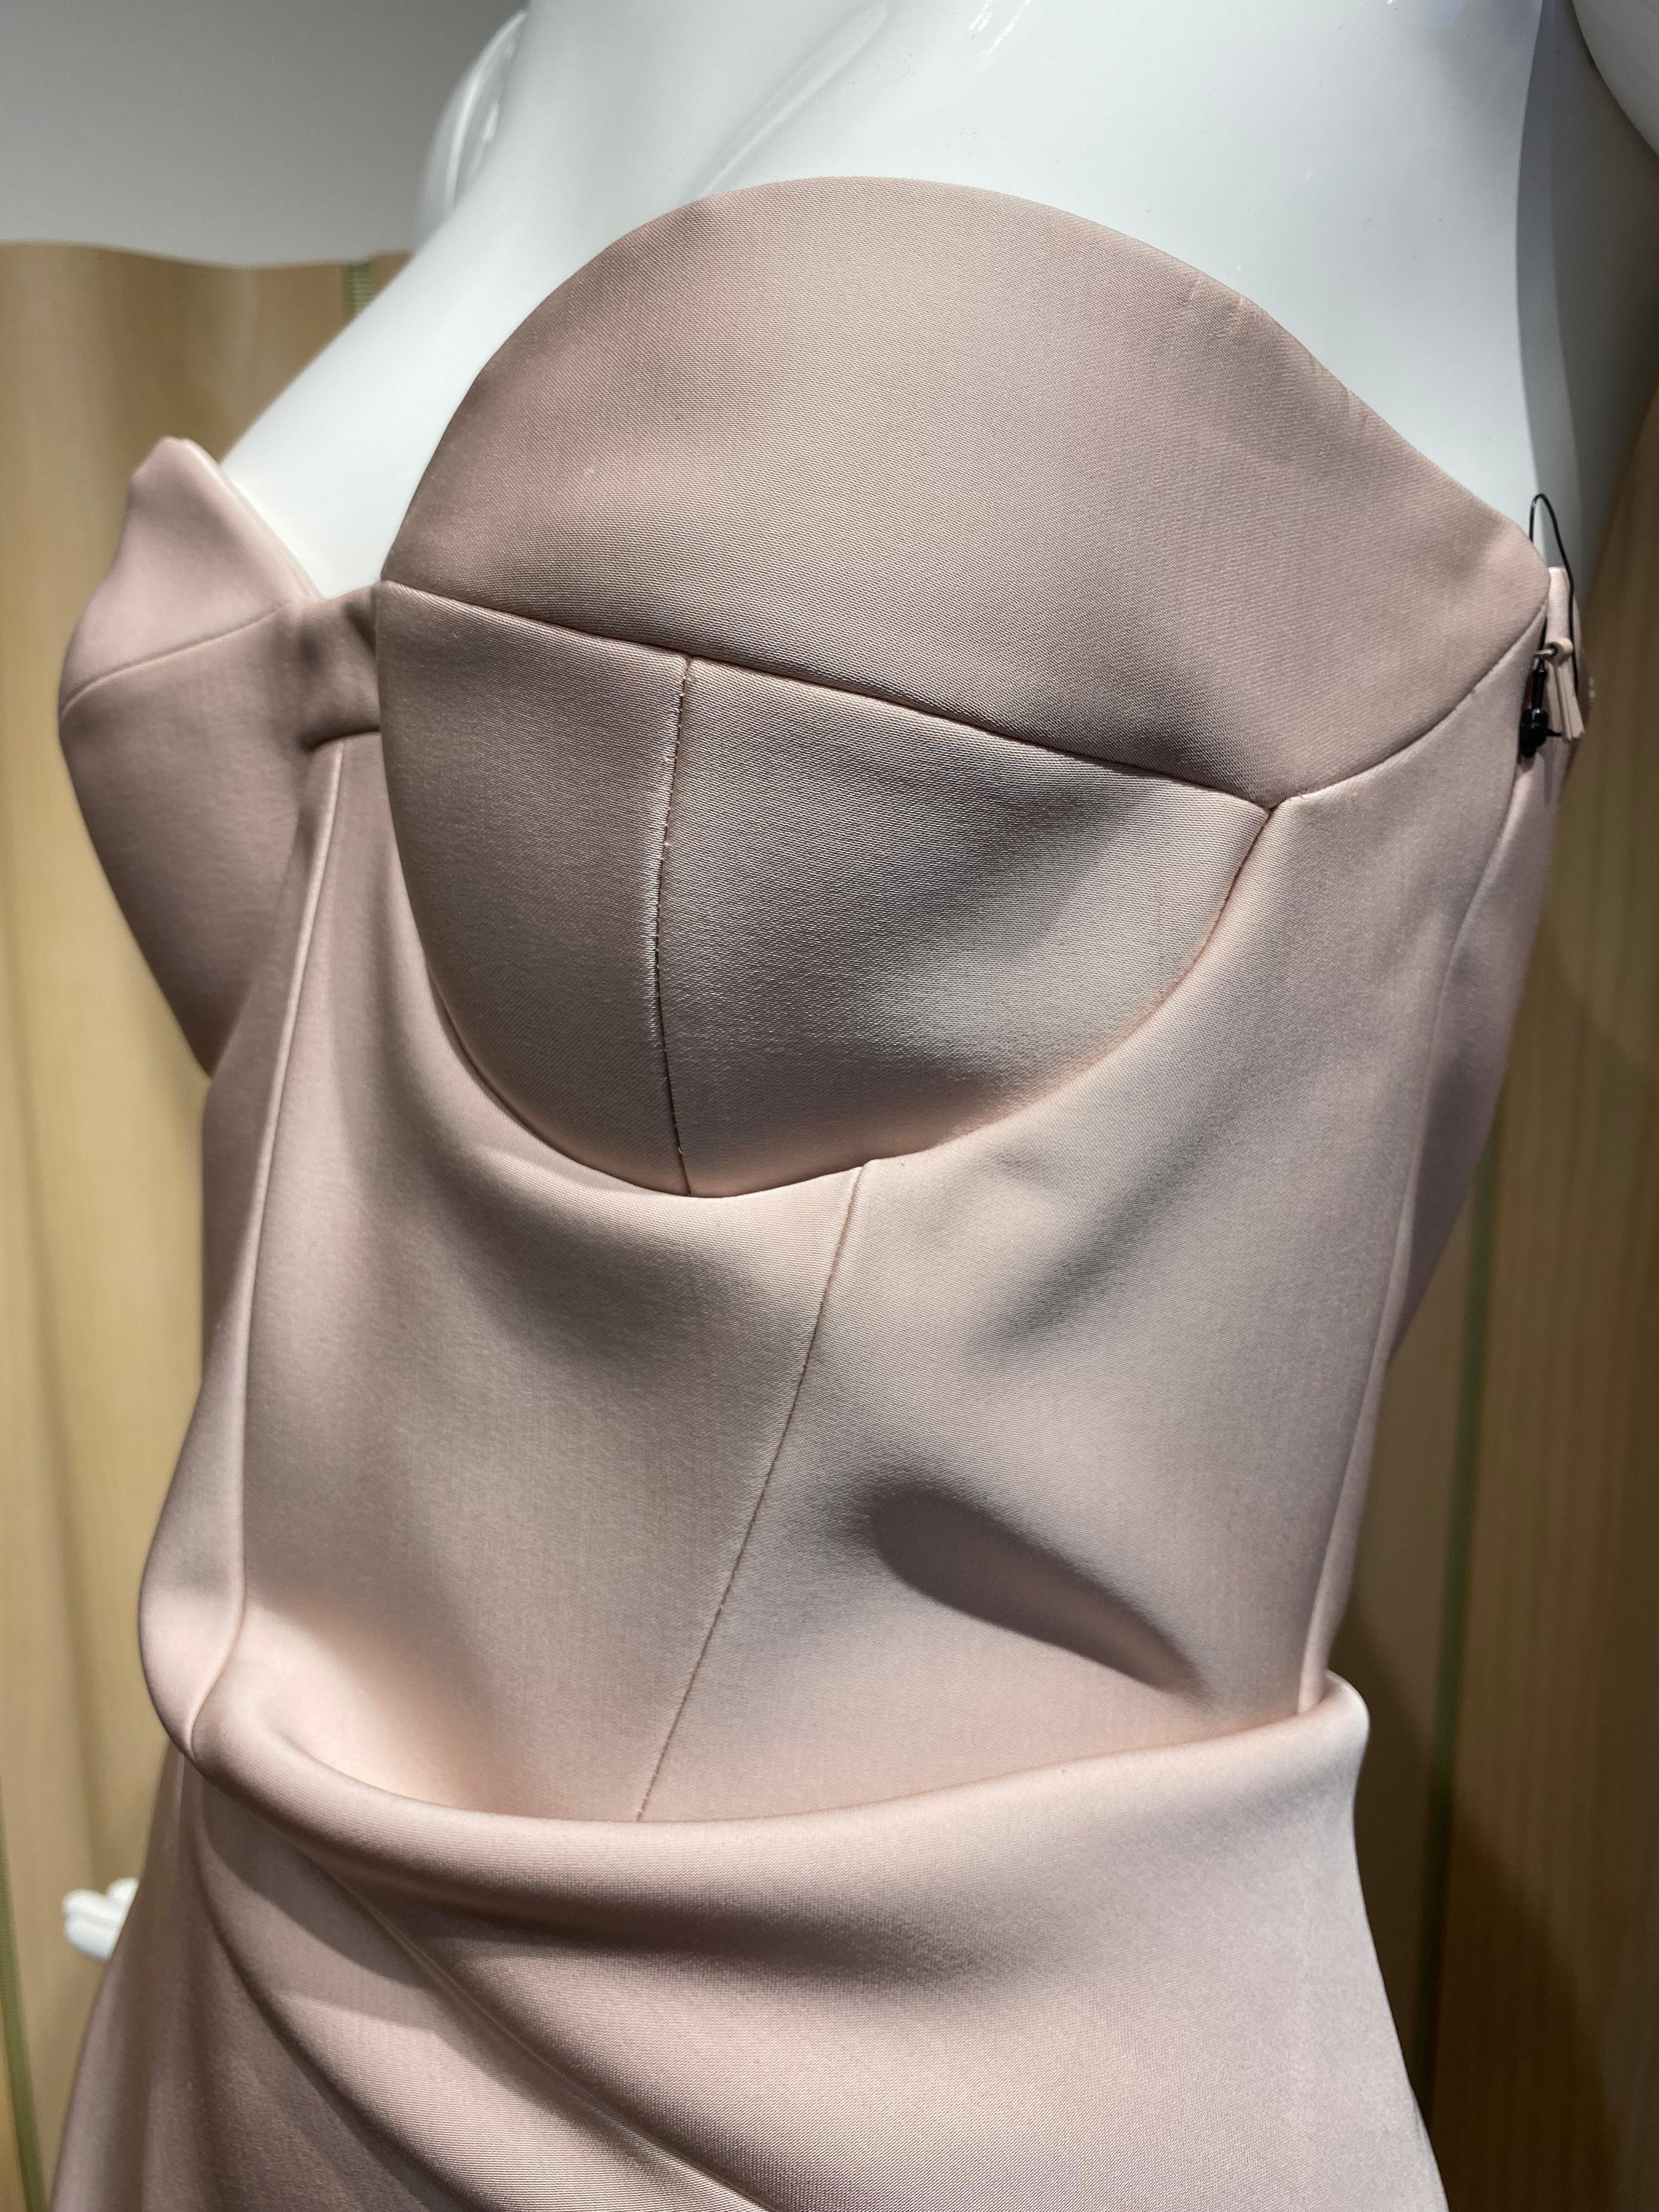 2012 Jil Sander by Raf Simons Final collection Pale Pink and white crepe strapless gown with peplum hip and pockets ( see runway photo)
Brand new Dress comes with tag. ( never worn) but there is small flaw in the fabric (see attached